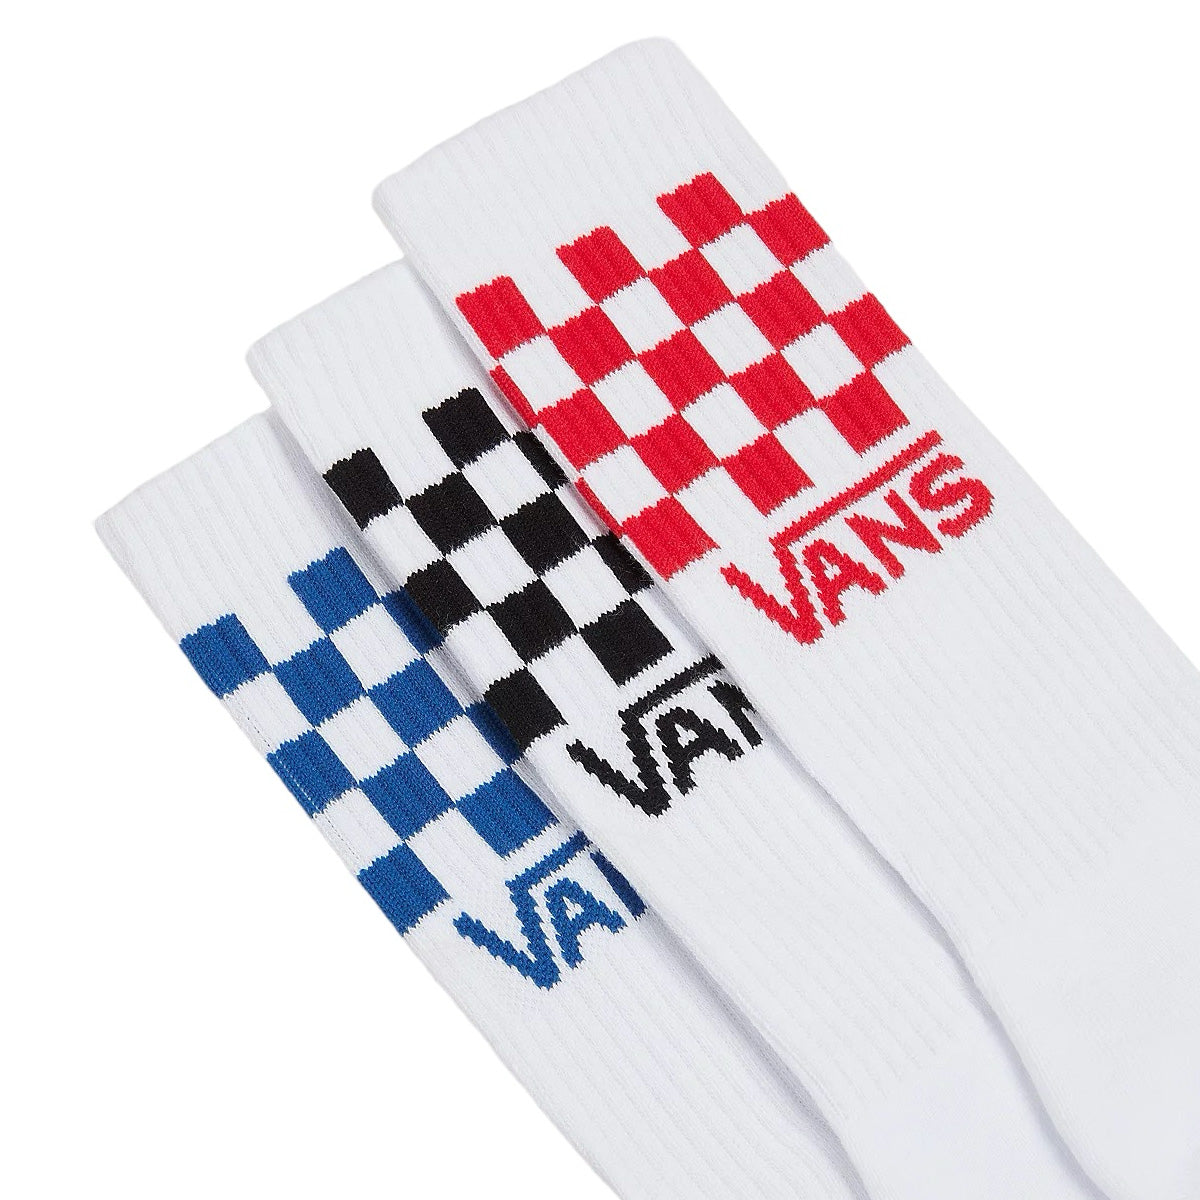 Vans classic logo crew 3 pack socks in white with red black and blue checkerboard logos. Free uk sipping over £50